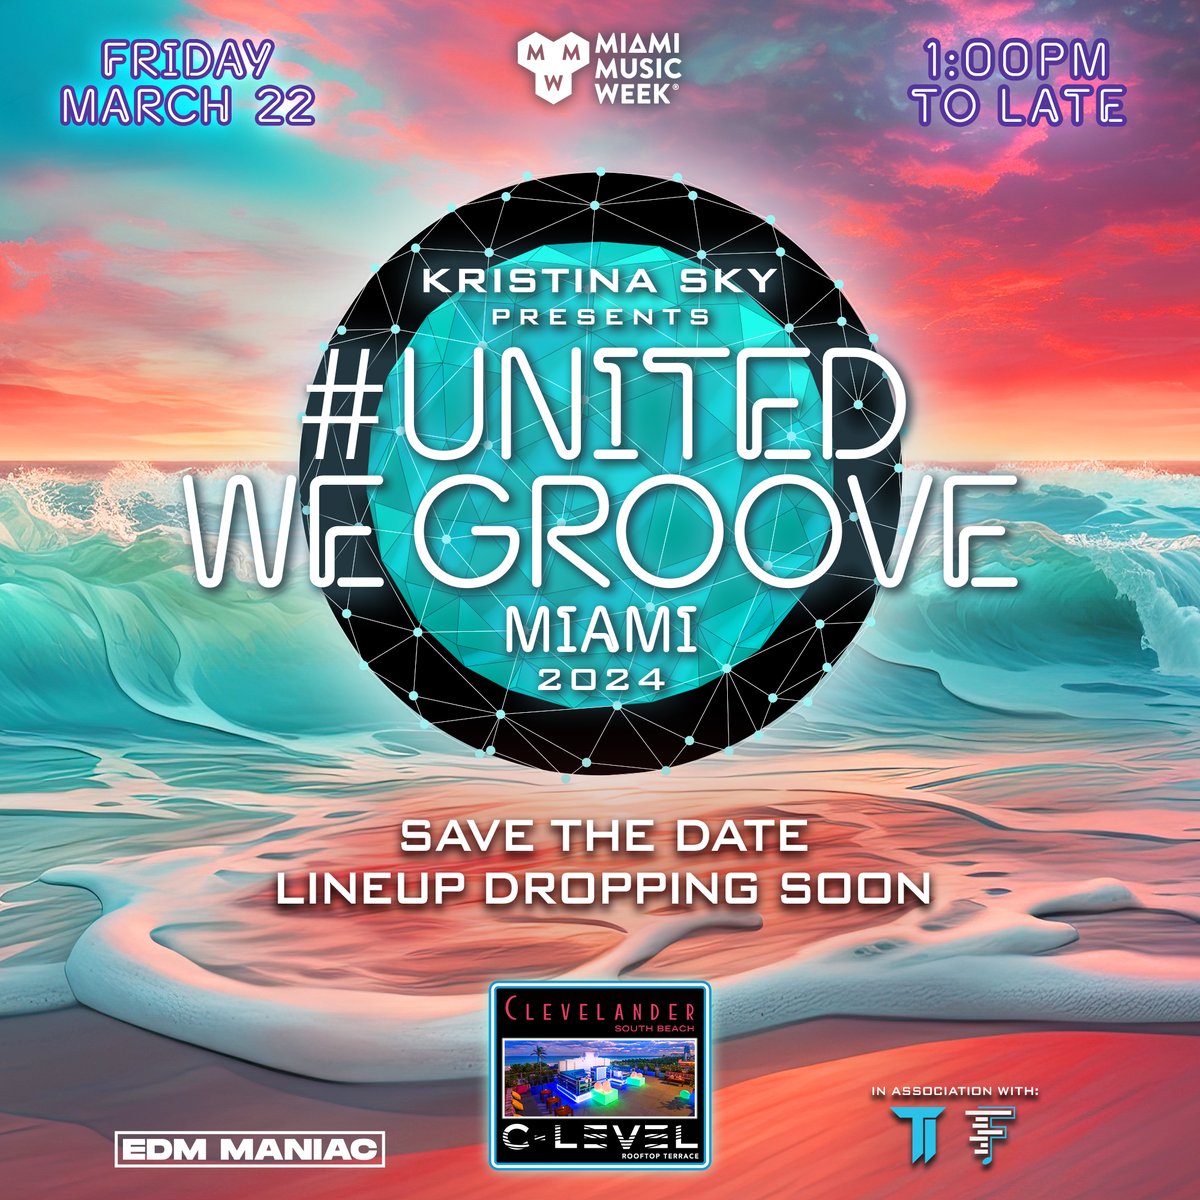 Activate rooftop vibes 😎🪄 Save the date for us and we’ll see u in Miami?! 🌴 Free w/ RSVP: bit.ly/UnitedWeGroove… #uwg #miami #mmw #staytuned